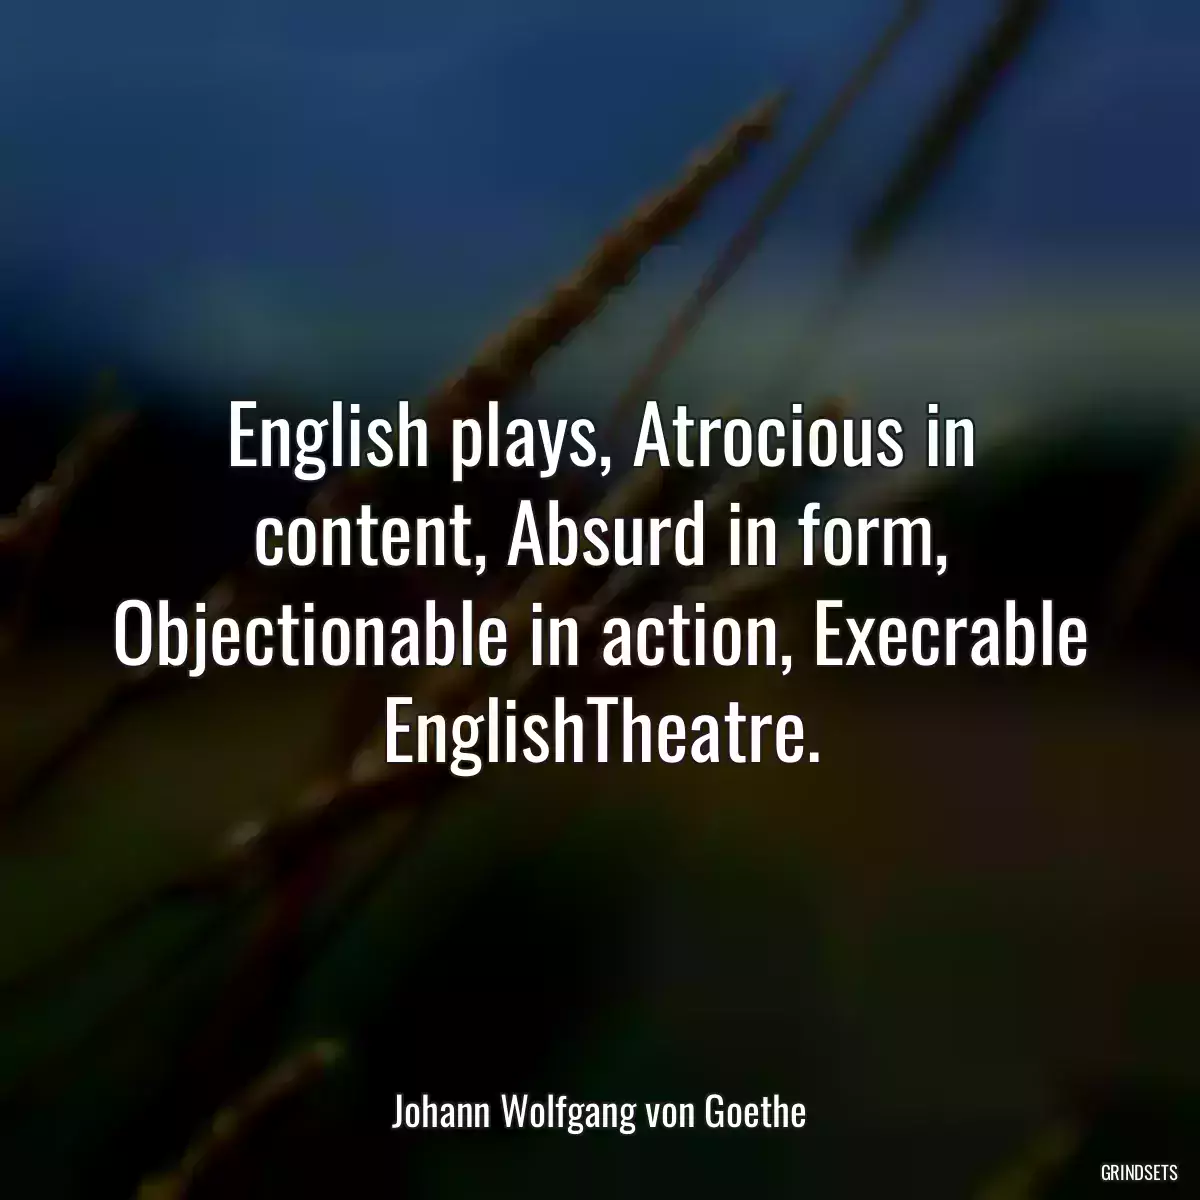 English plays, Atrocious in content, Absurd in form, Objectionable in action, Execrable EnglishTheatre.